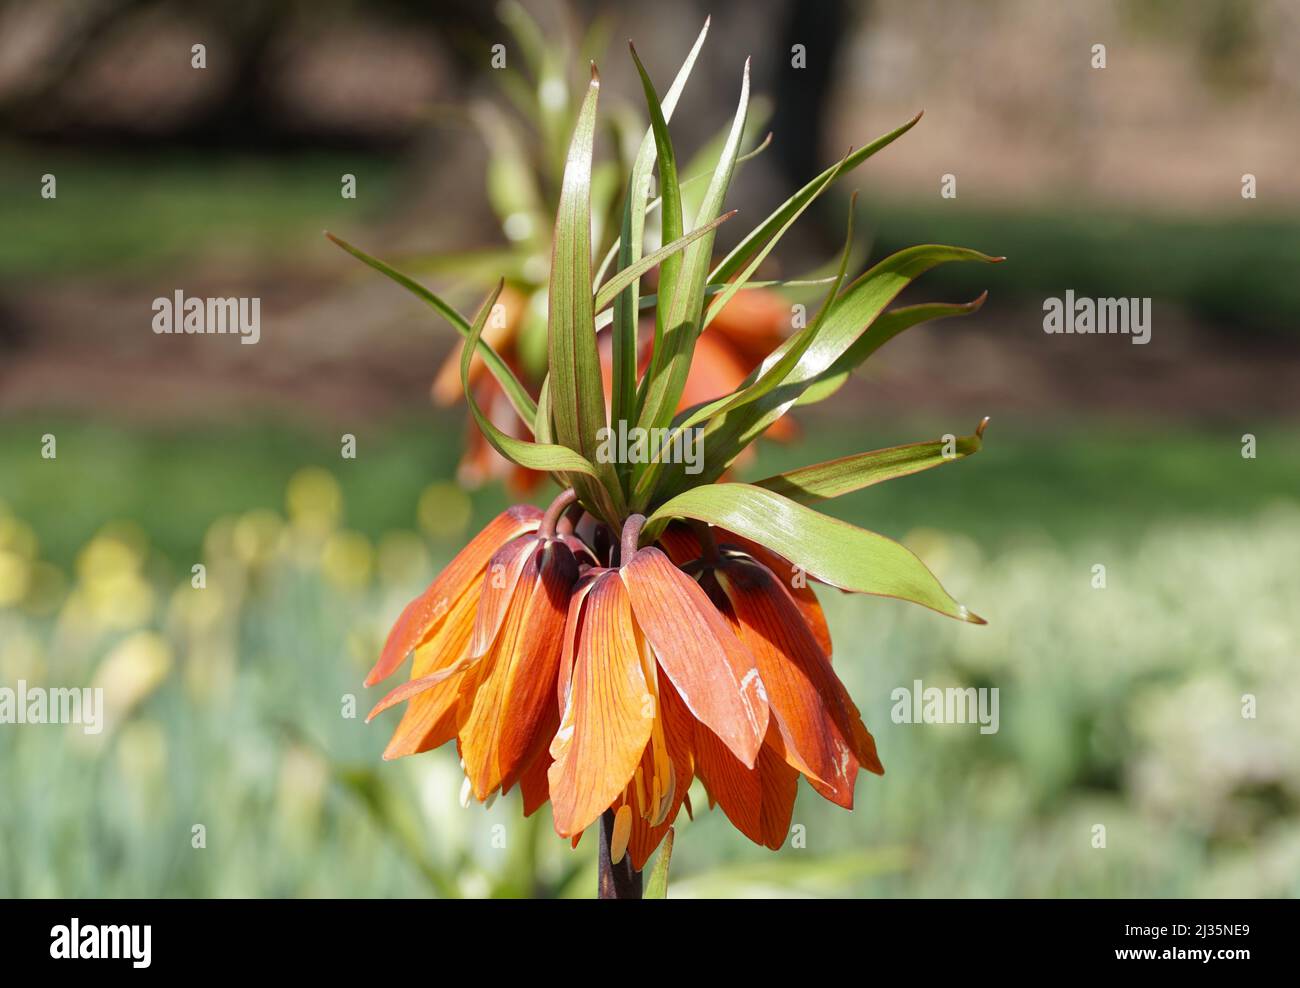 Orange color of Crown Imperial flowers, also known as Fritillaria Imperialis, blooming in early Spring Stock Photo